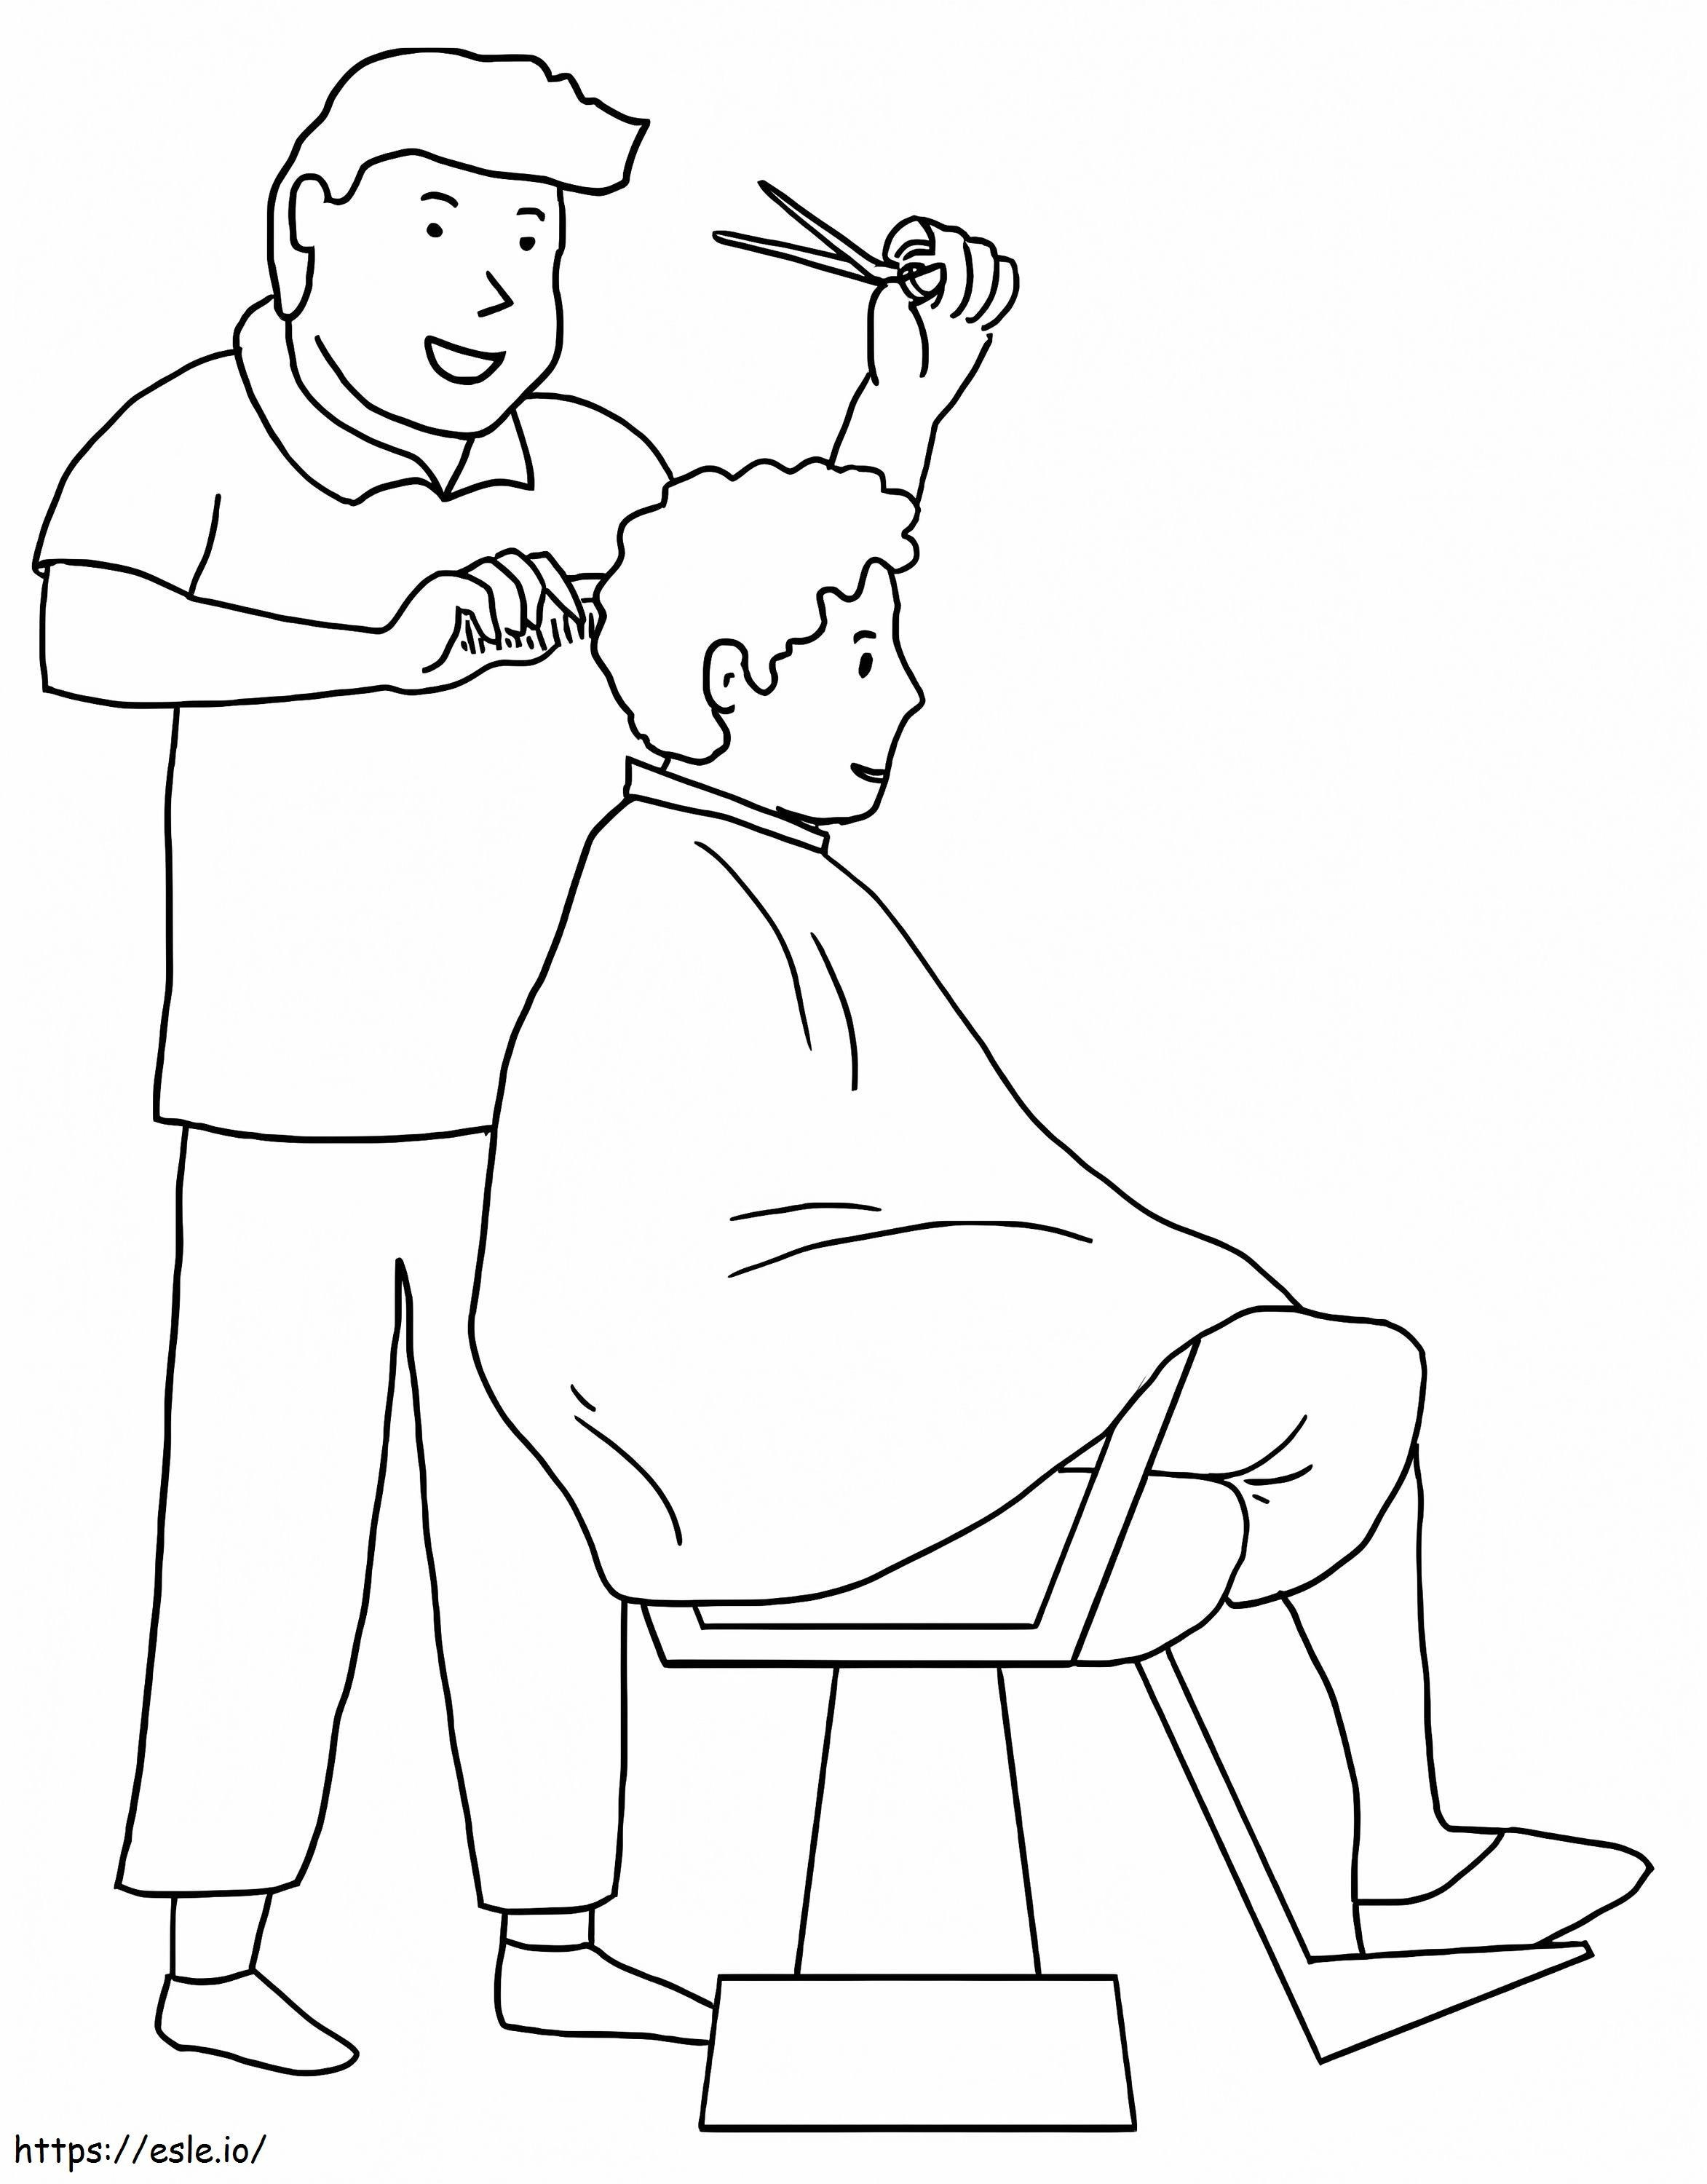 The Barber coloring page